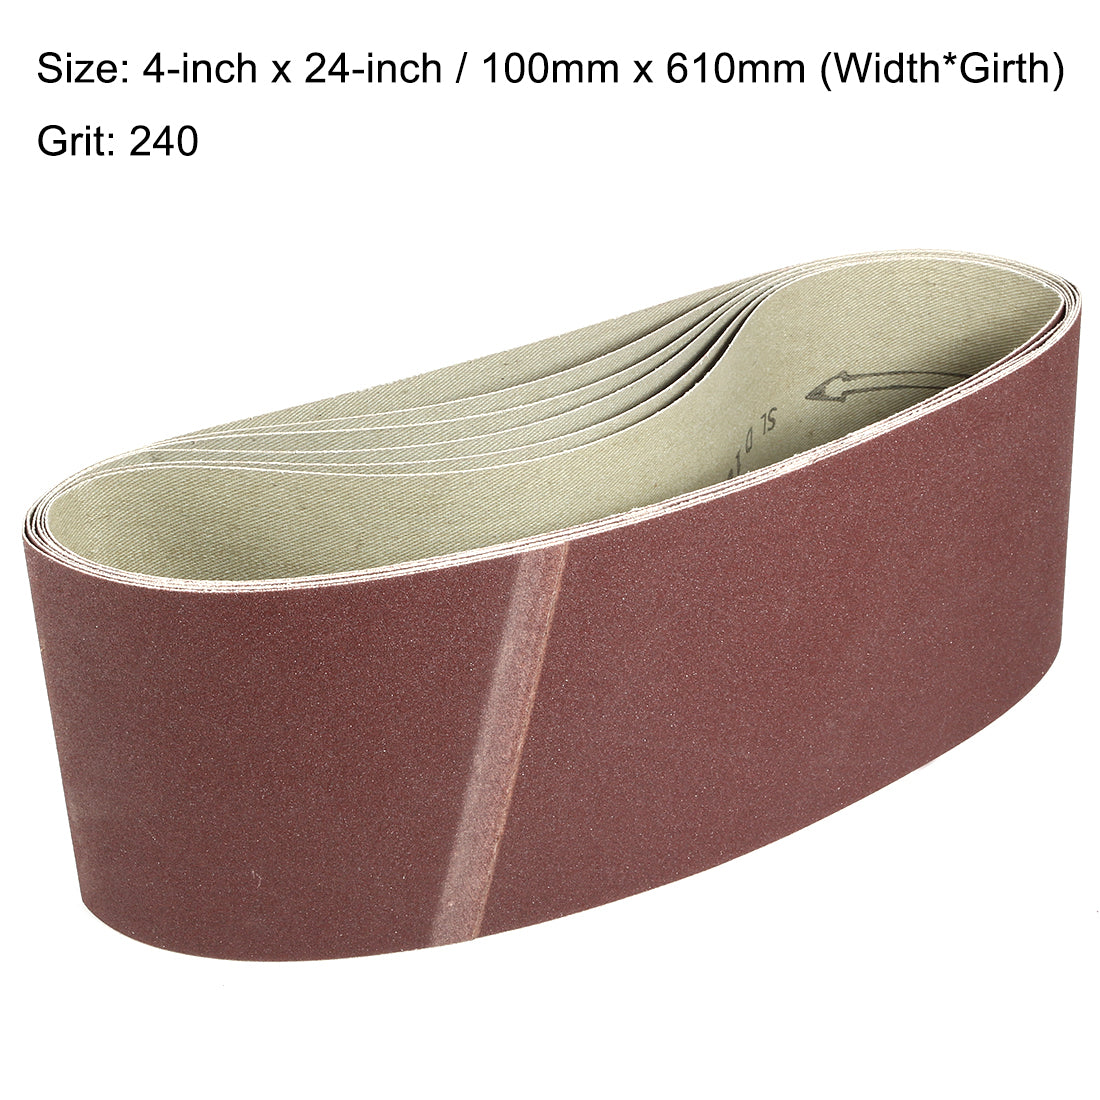 uxcell Uxcell 4-Inch x 24-Inch Aluminum Oxide Sanding Belt 240 Grits Lapped Joint 6pcs